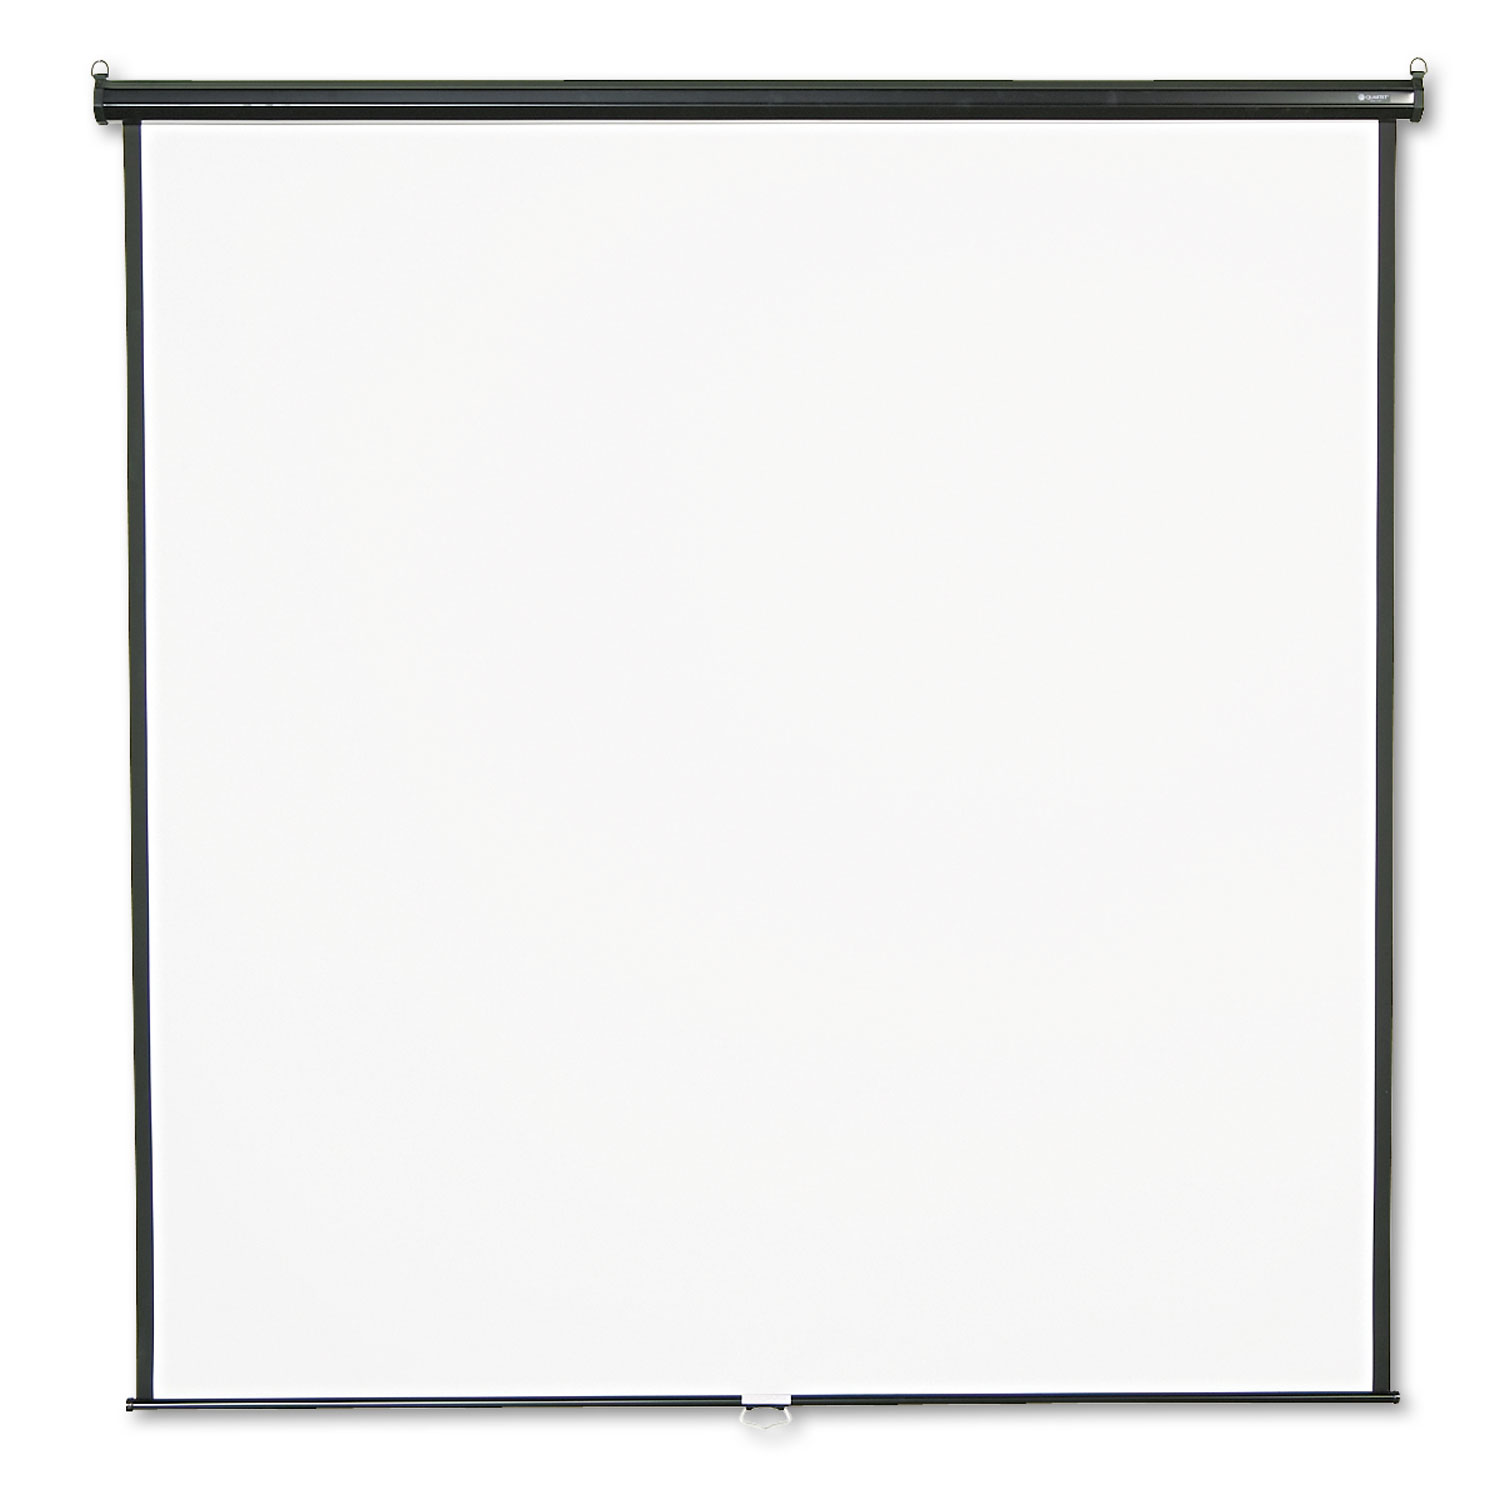 Wall or Ceiling Projection Screen, 84 x 84, White Matte, Black Matte Casing